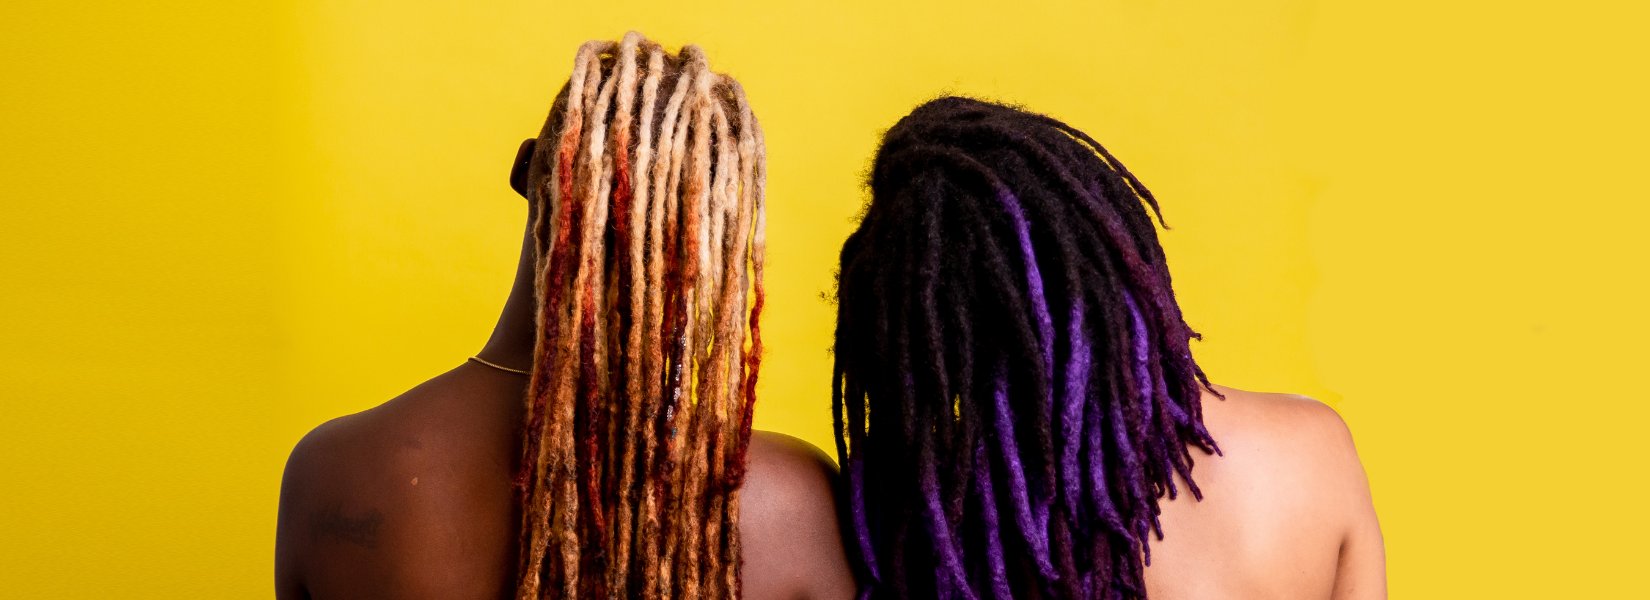 How to Restore Locs that have Been Damaged from Color